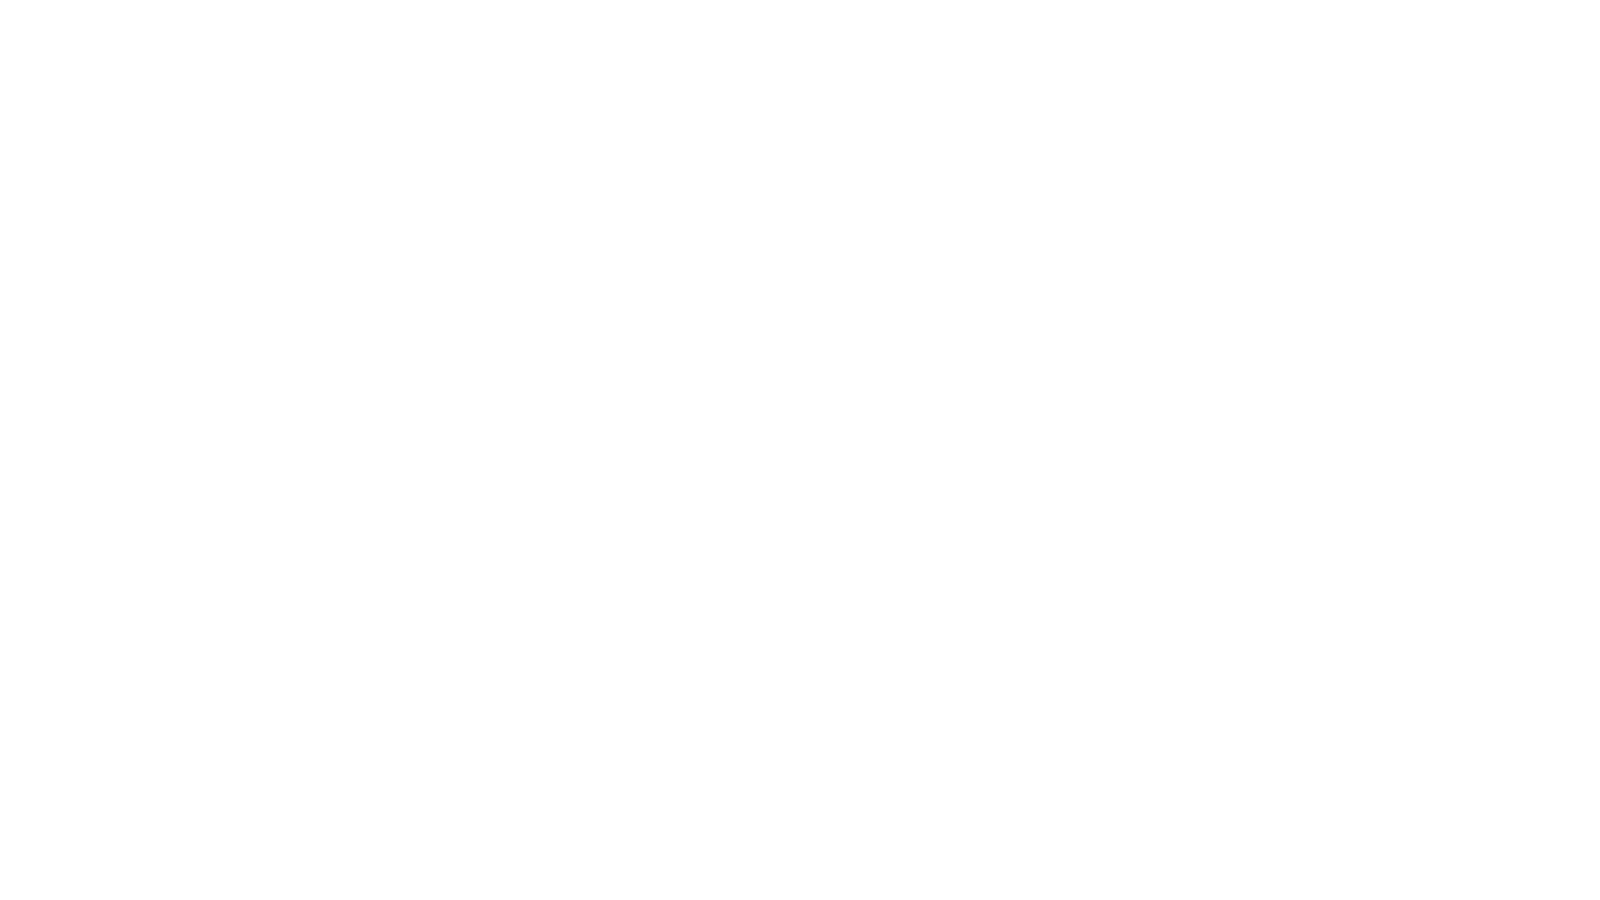 Helen White Electrologist/Laser and Permanent Makeup